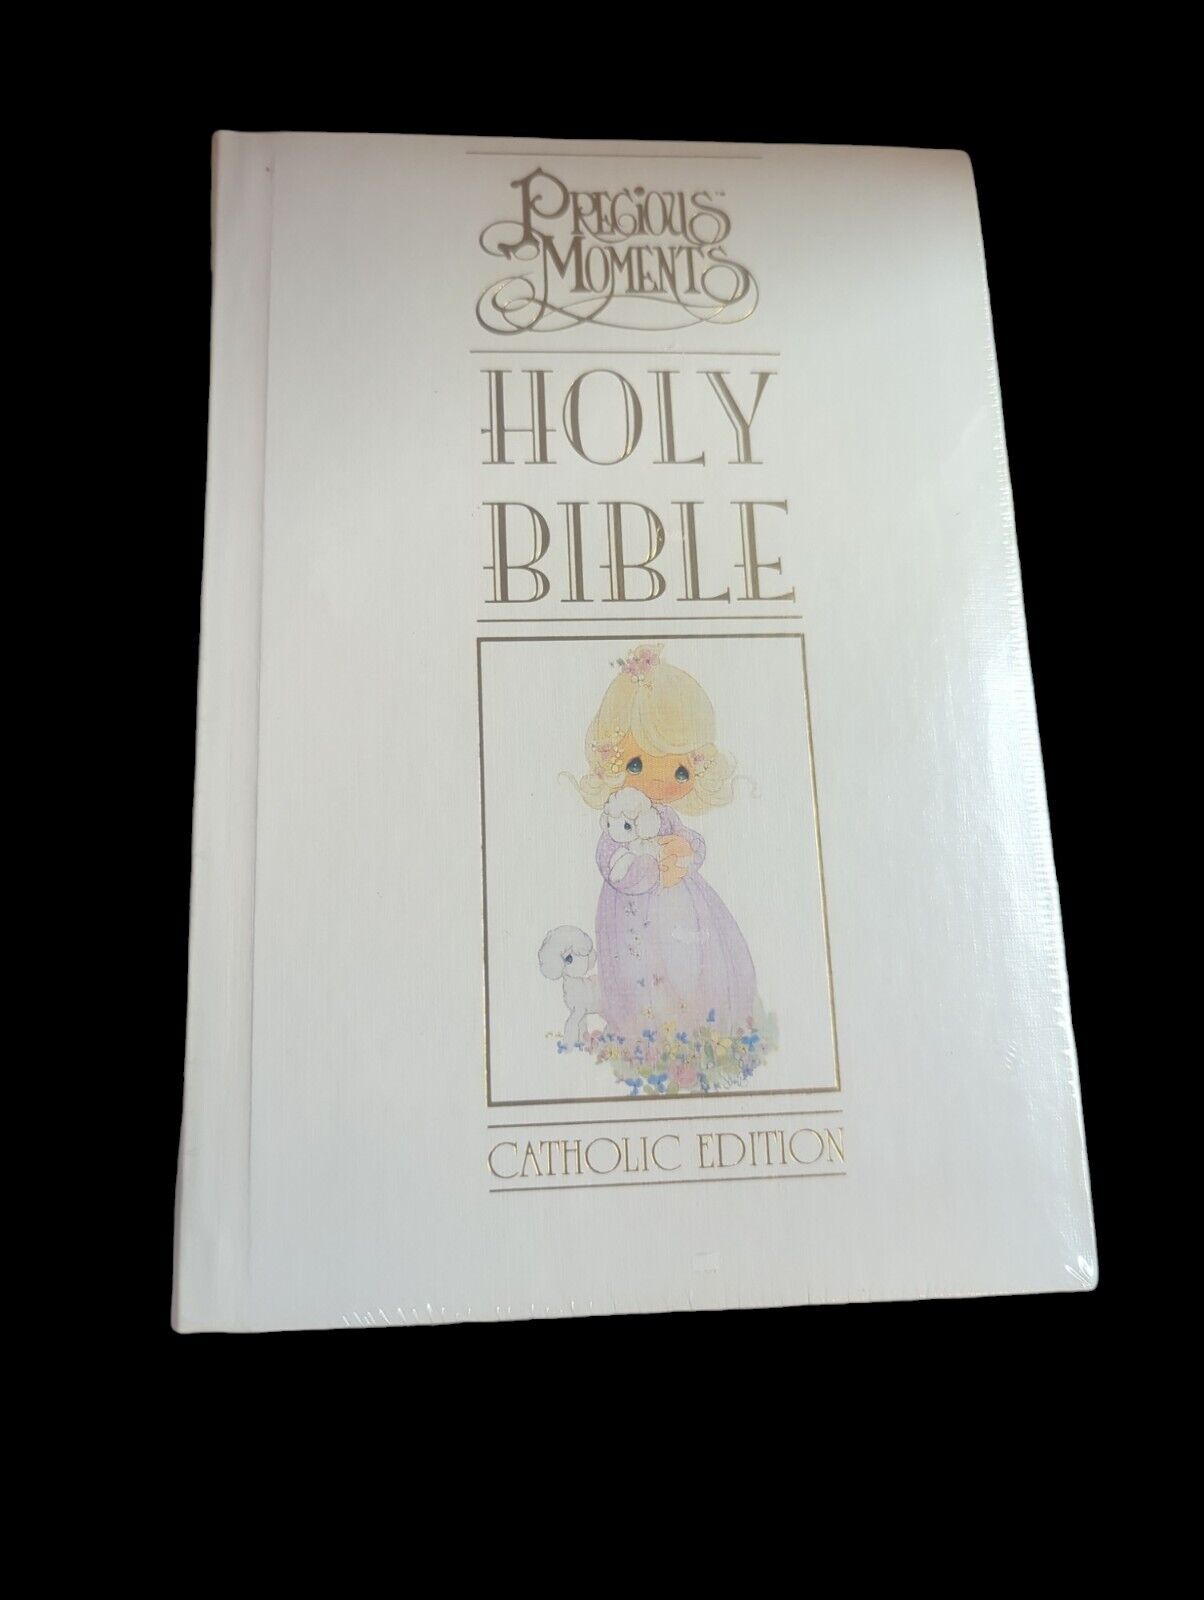 Child\'s First Bible by Precious Moments Holy Bible Catholic Edition WHITE NRSV 